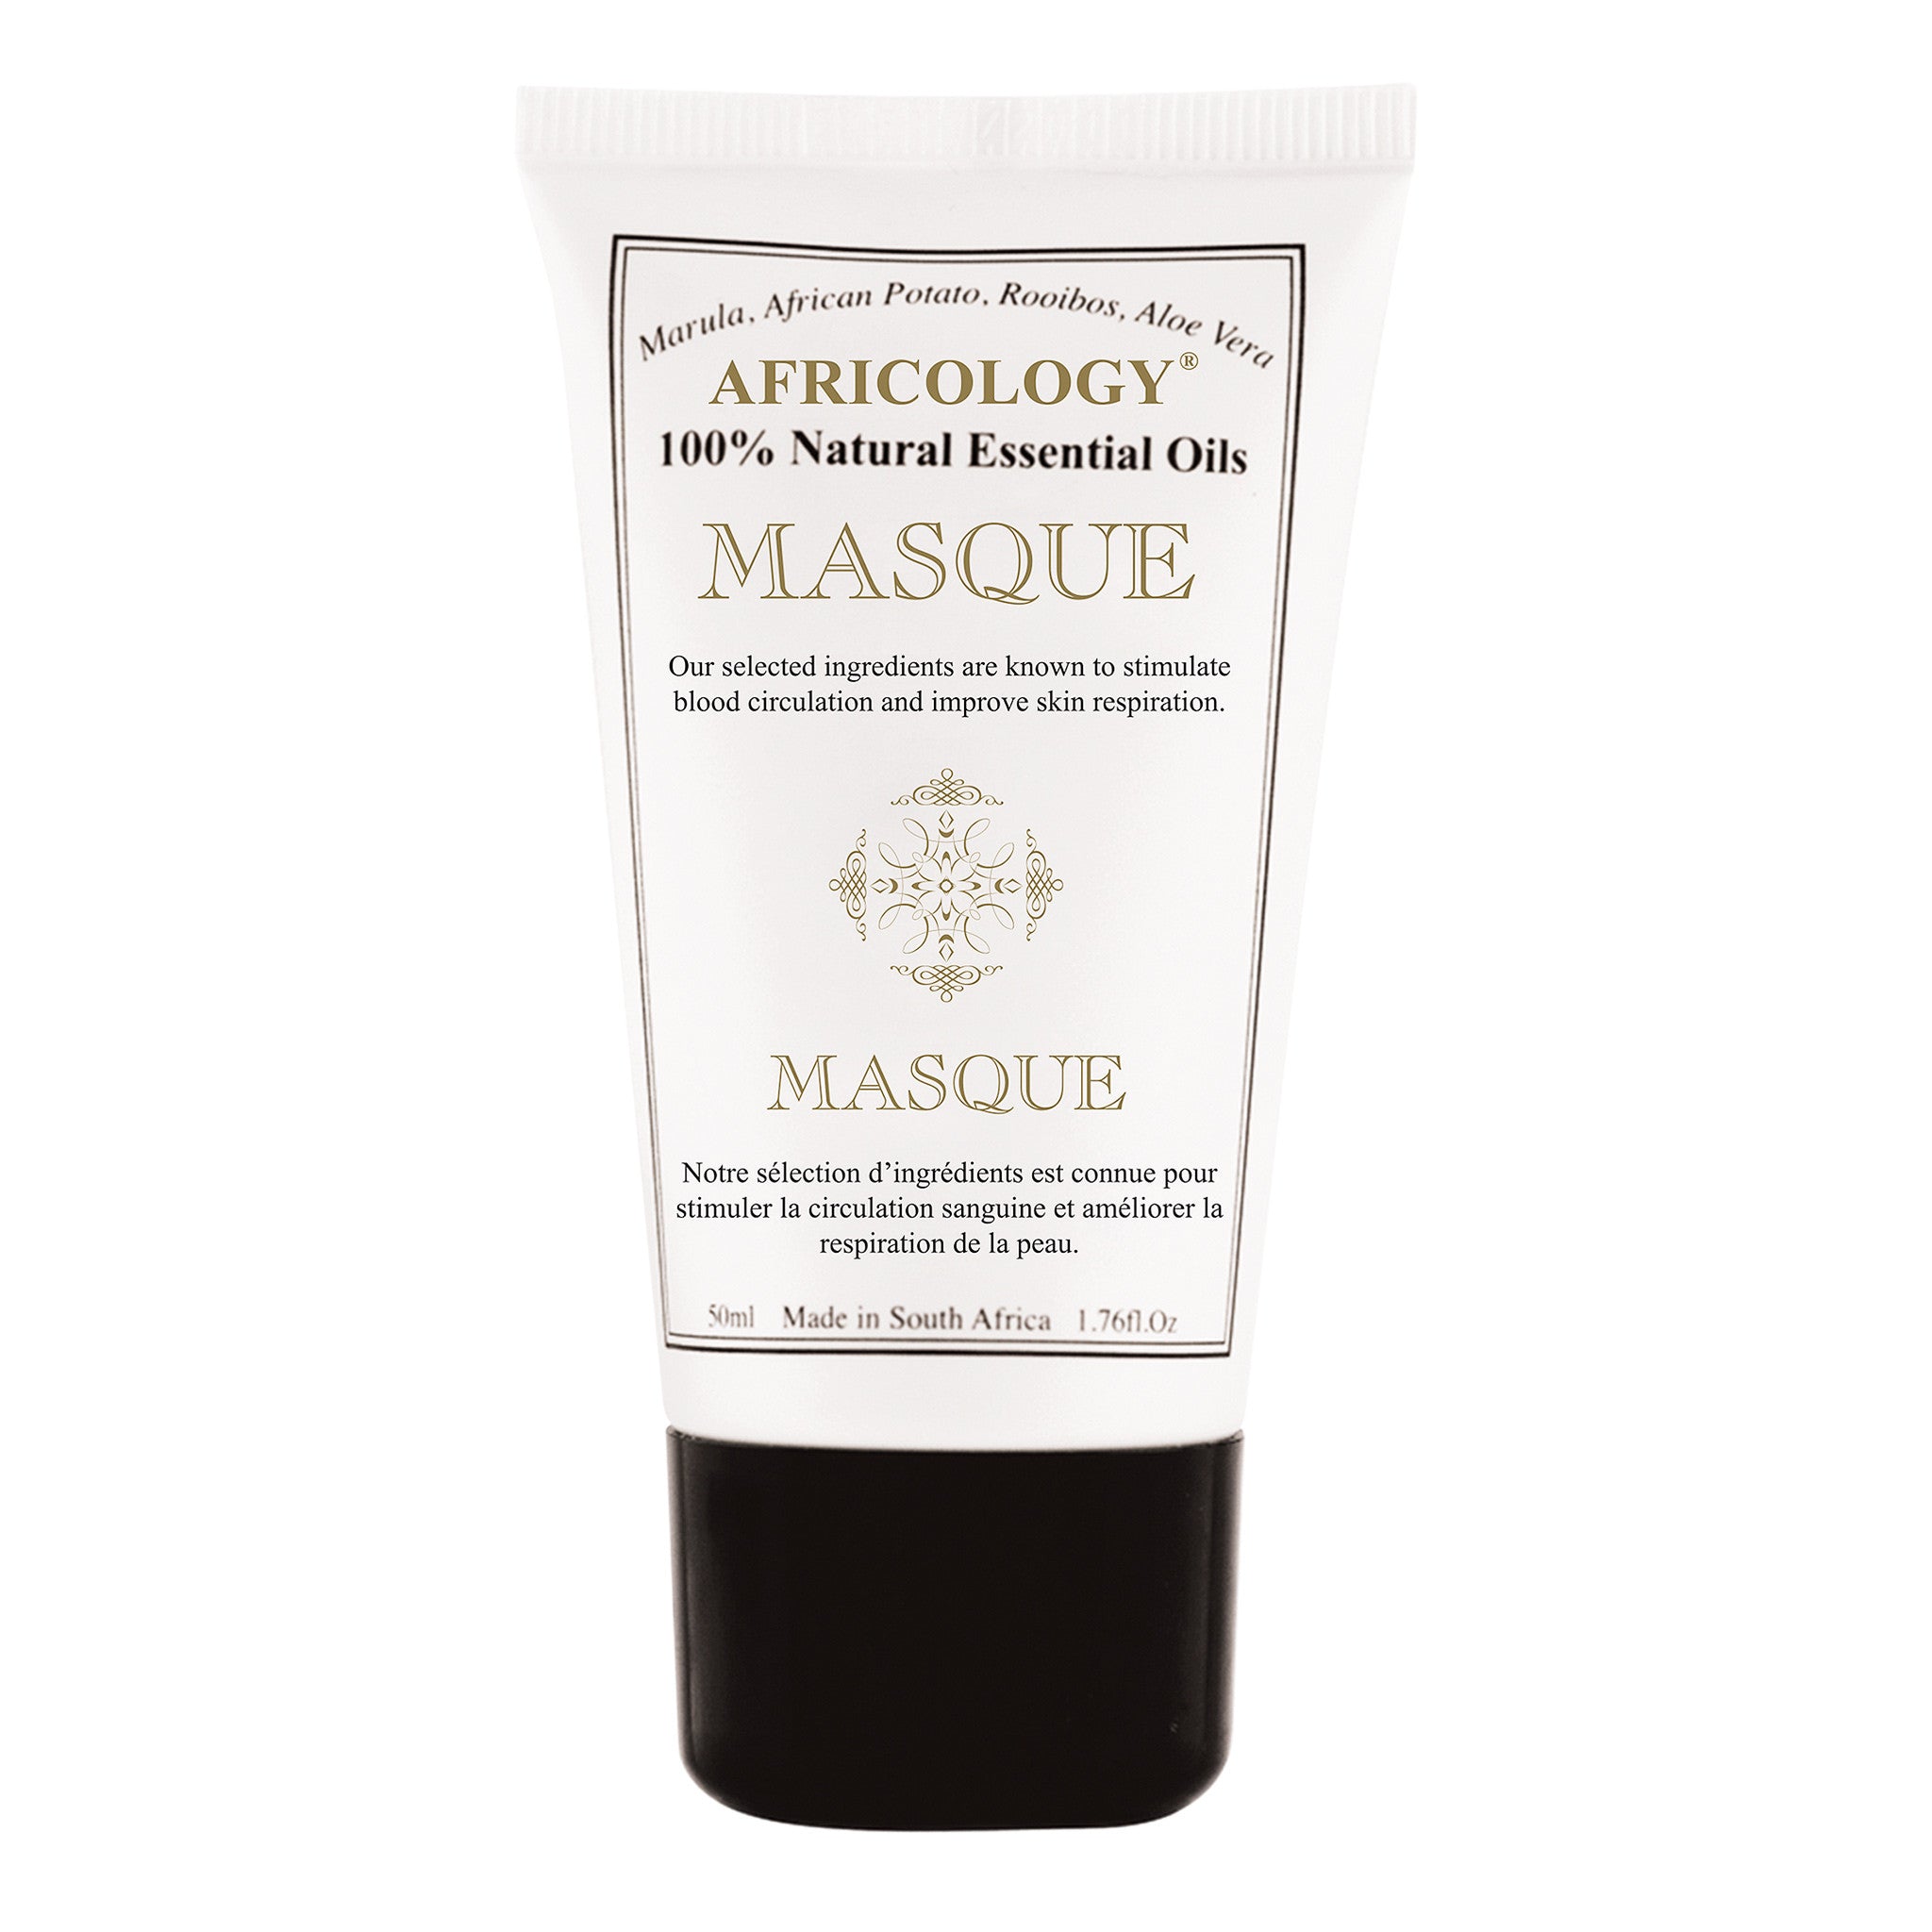 Africology Clay Masque